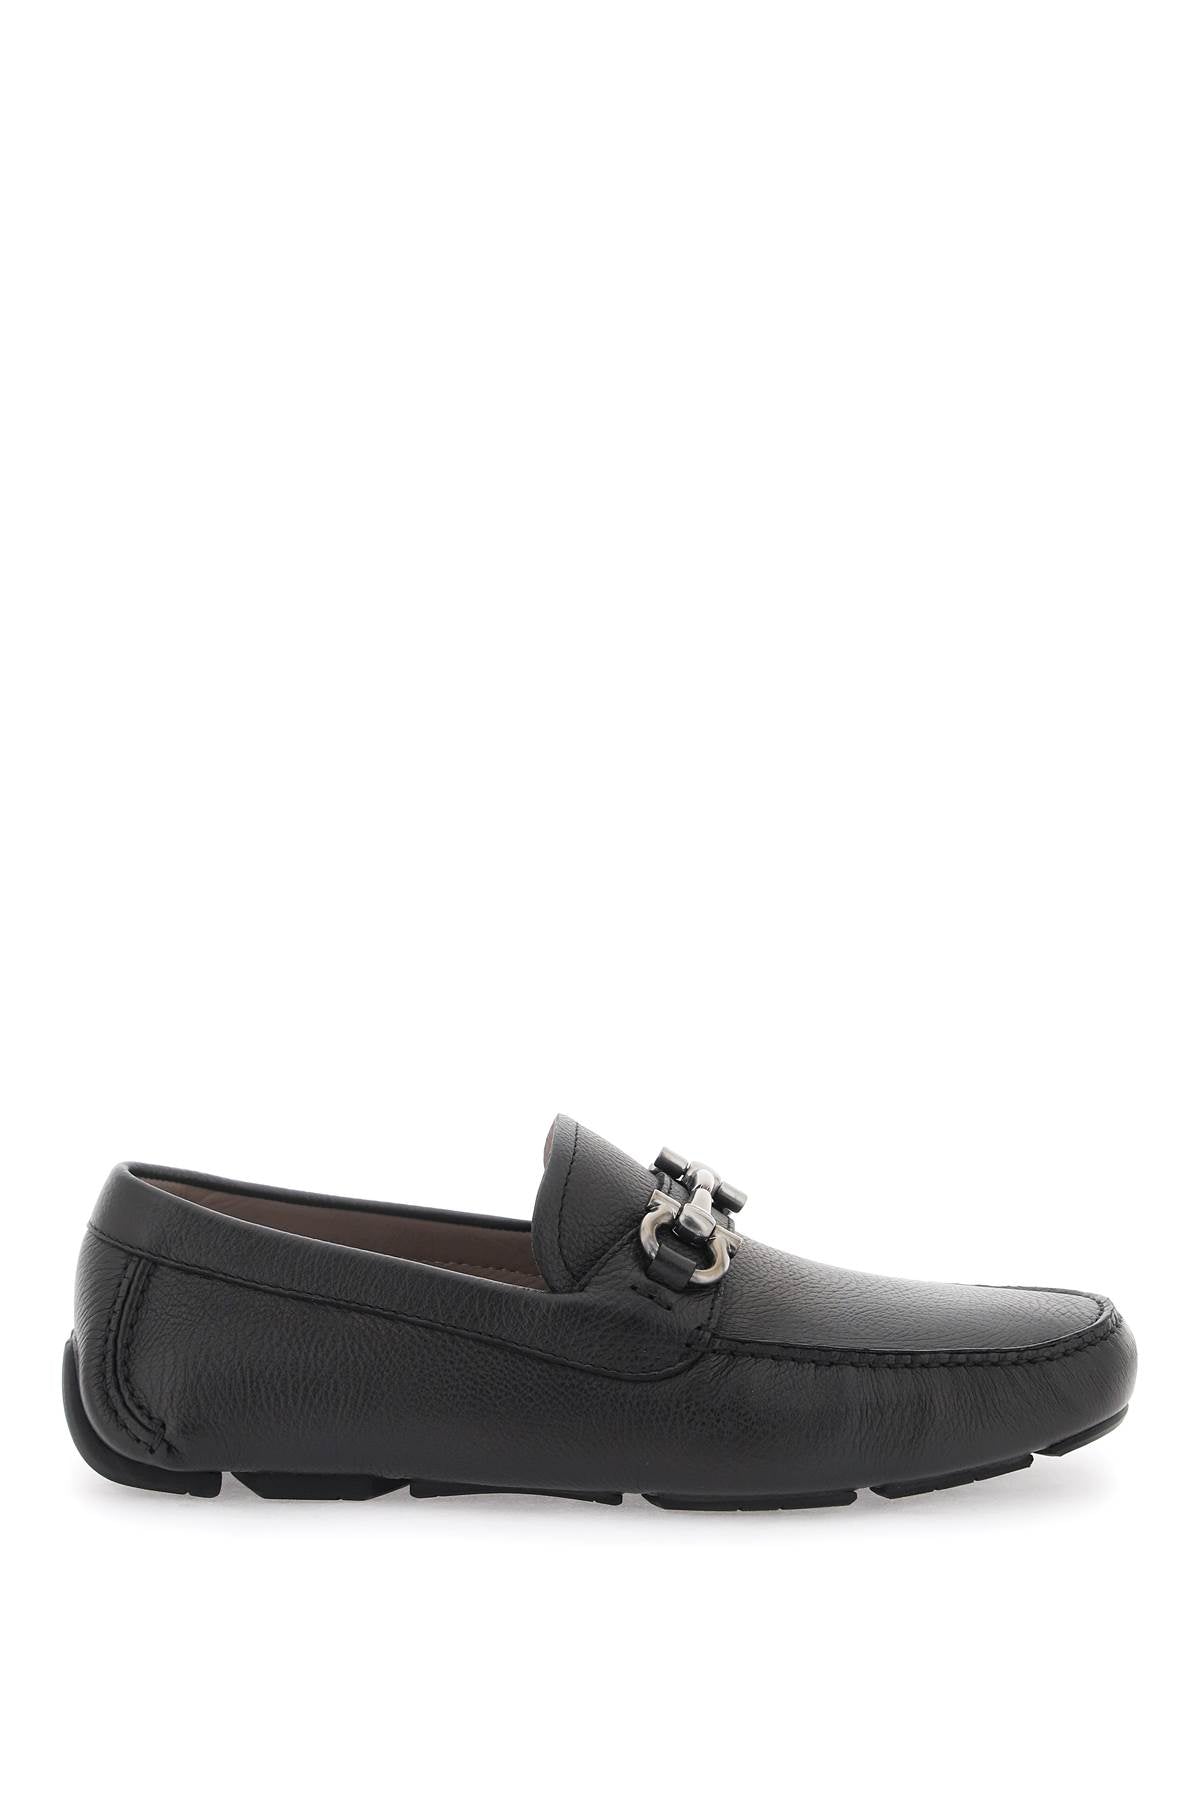 FERRAGAMO Grained Leather Moccasins with Gancini Hook Detail